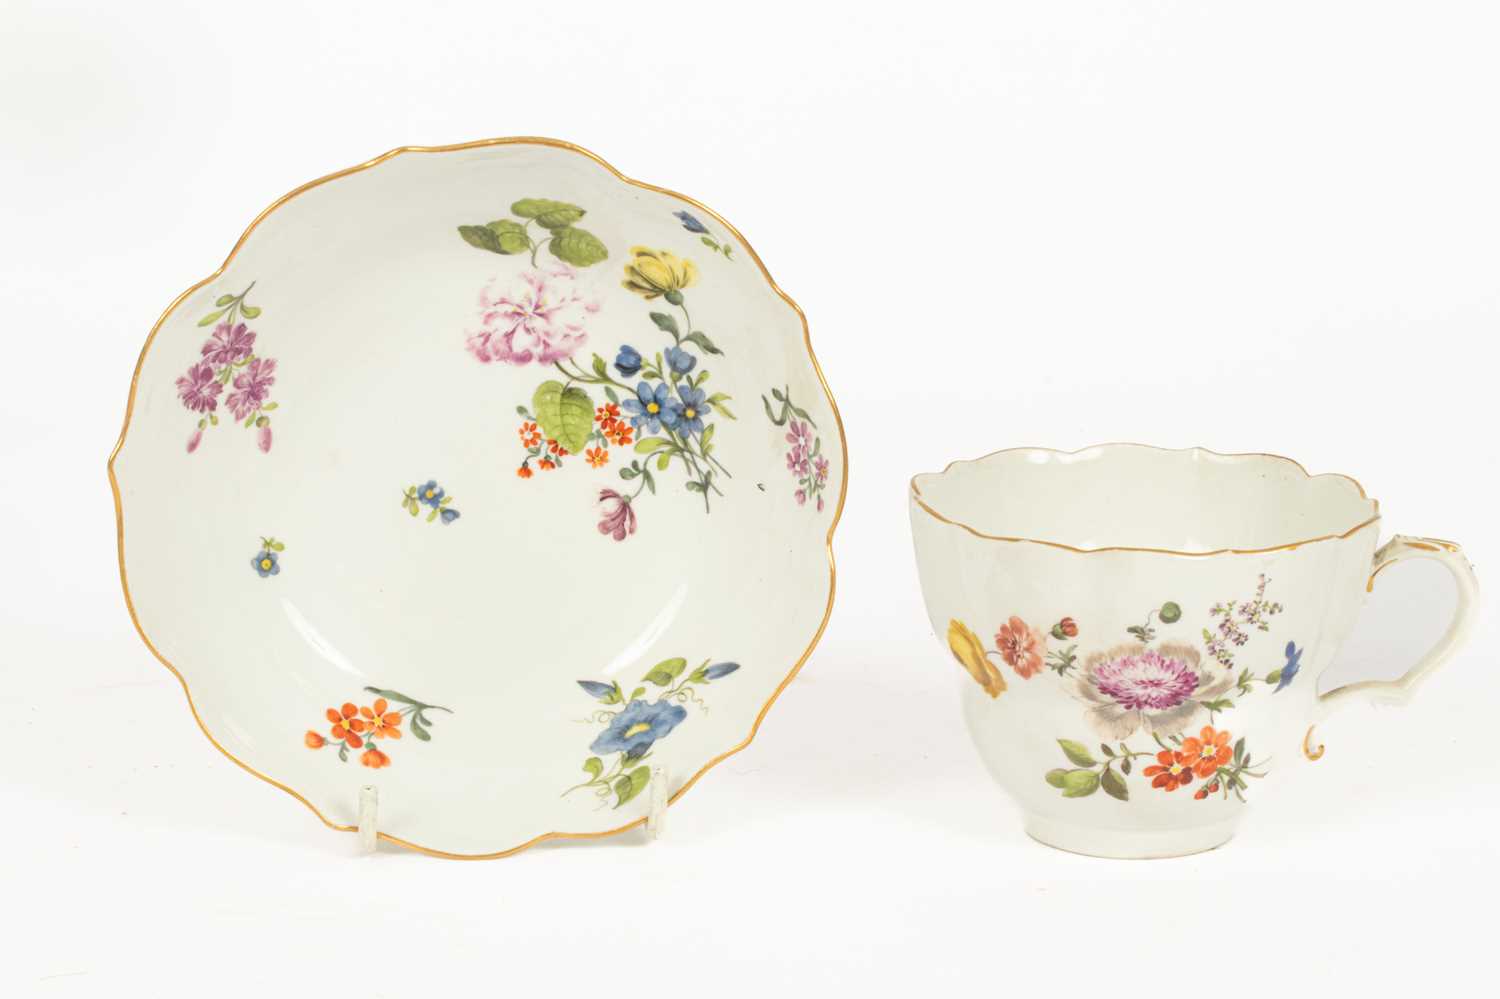 Two Meissen ogee bowls and a saucer - Image 2 of 3